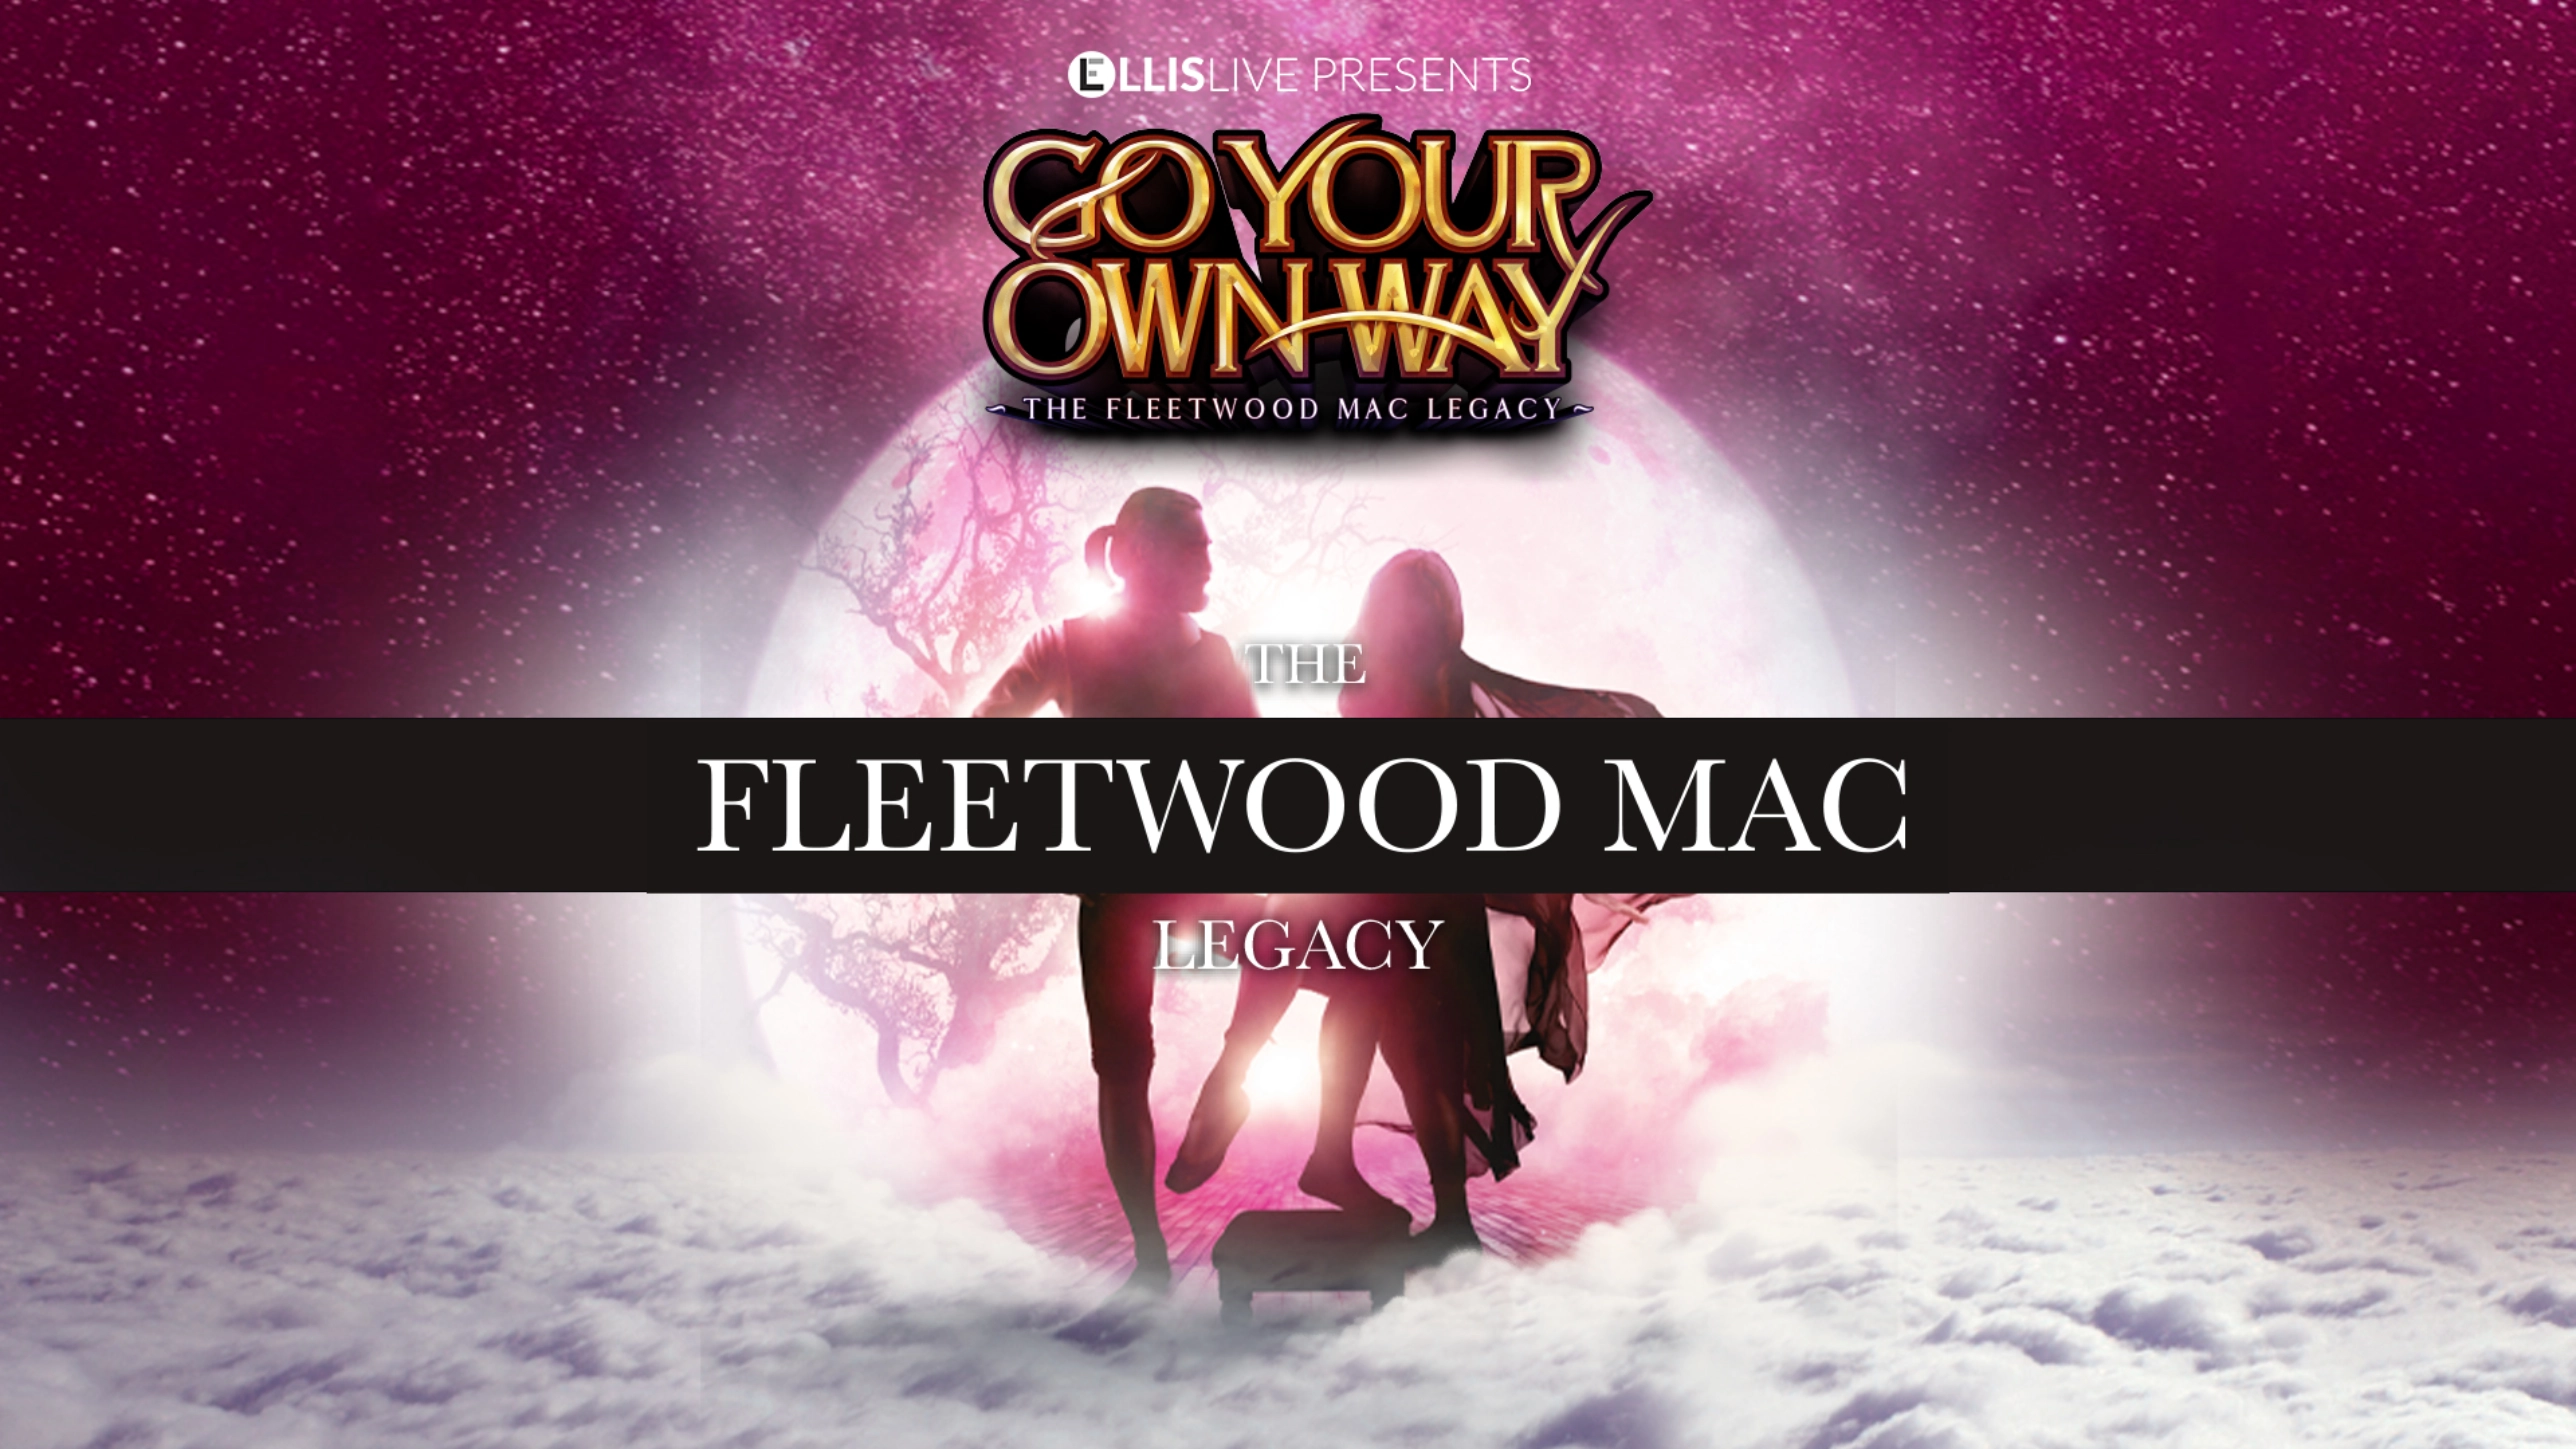 Go Your Own Way - The Fleetwood Mac Legacy